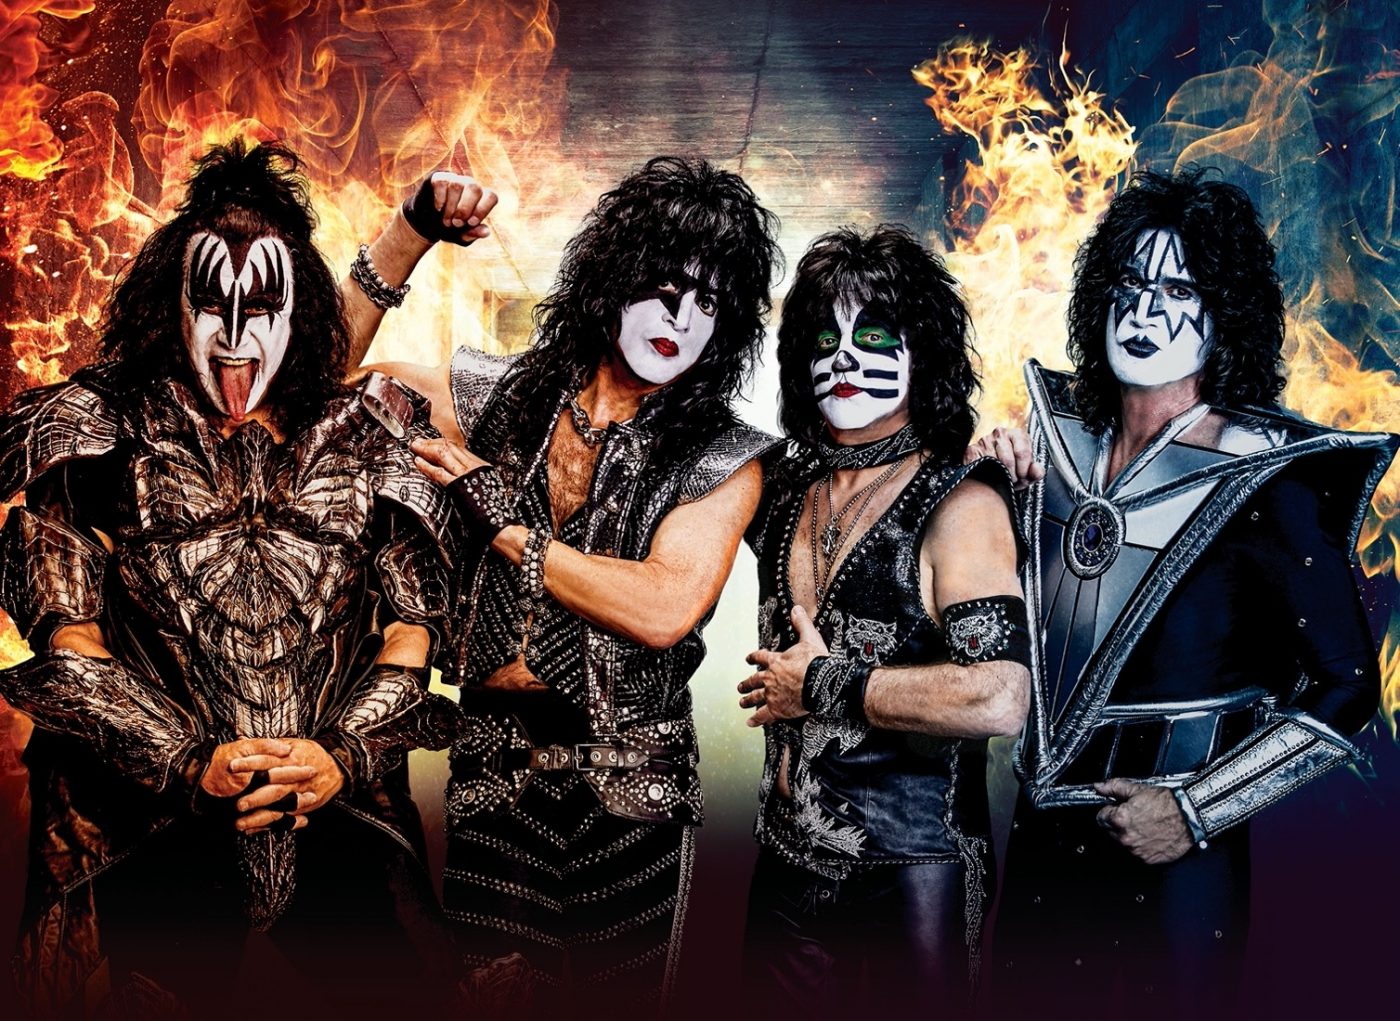 KISS、東京ドームにてアンコール来日公演の開催が決定 - 画像一覧（3/3）